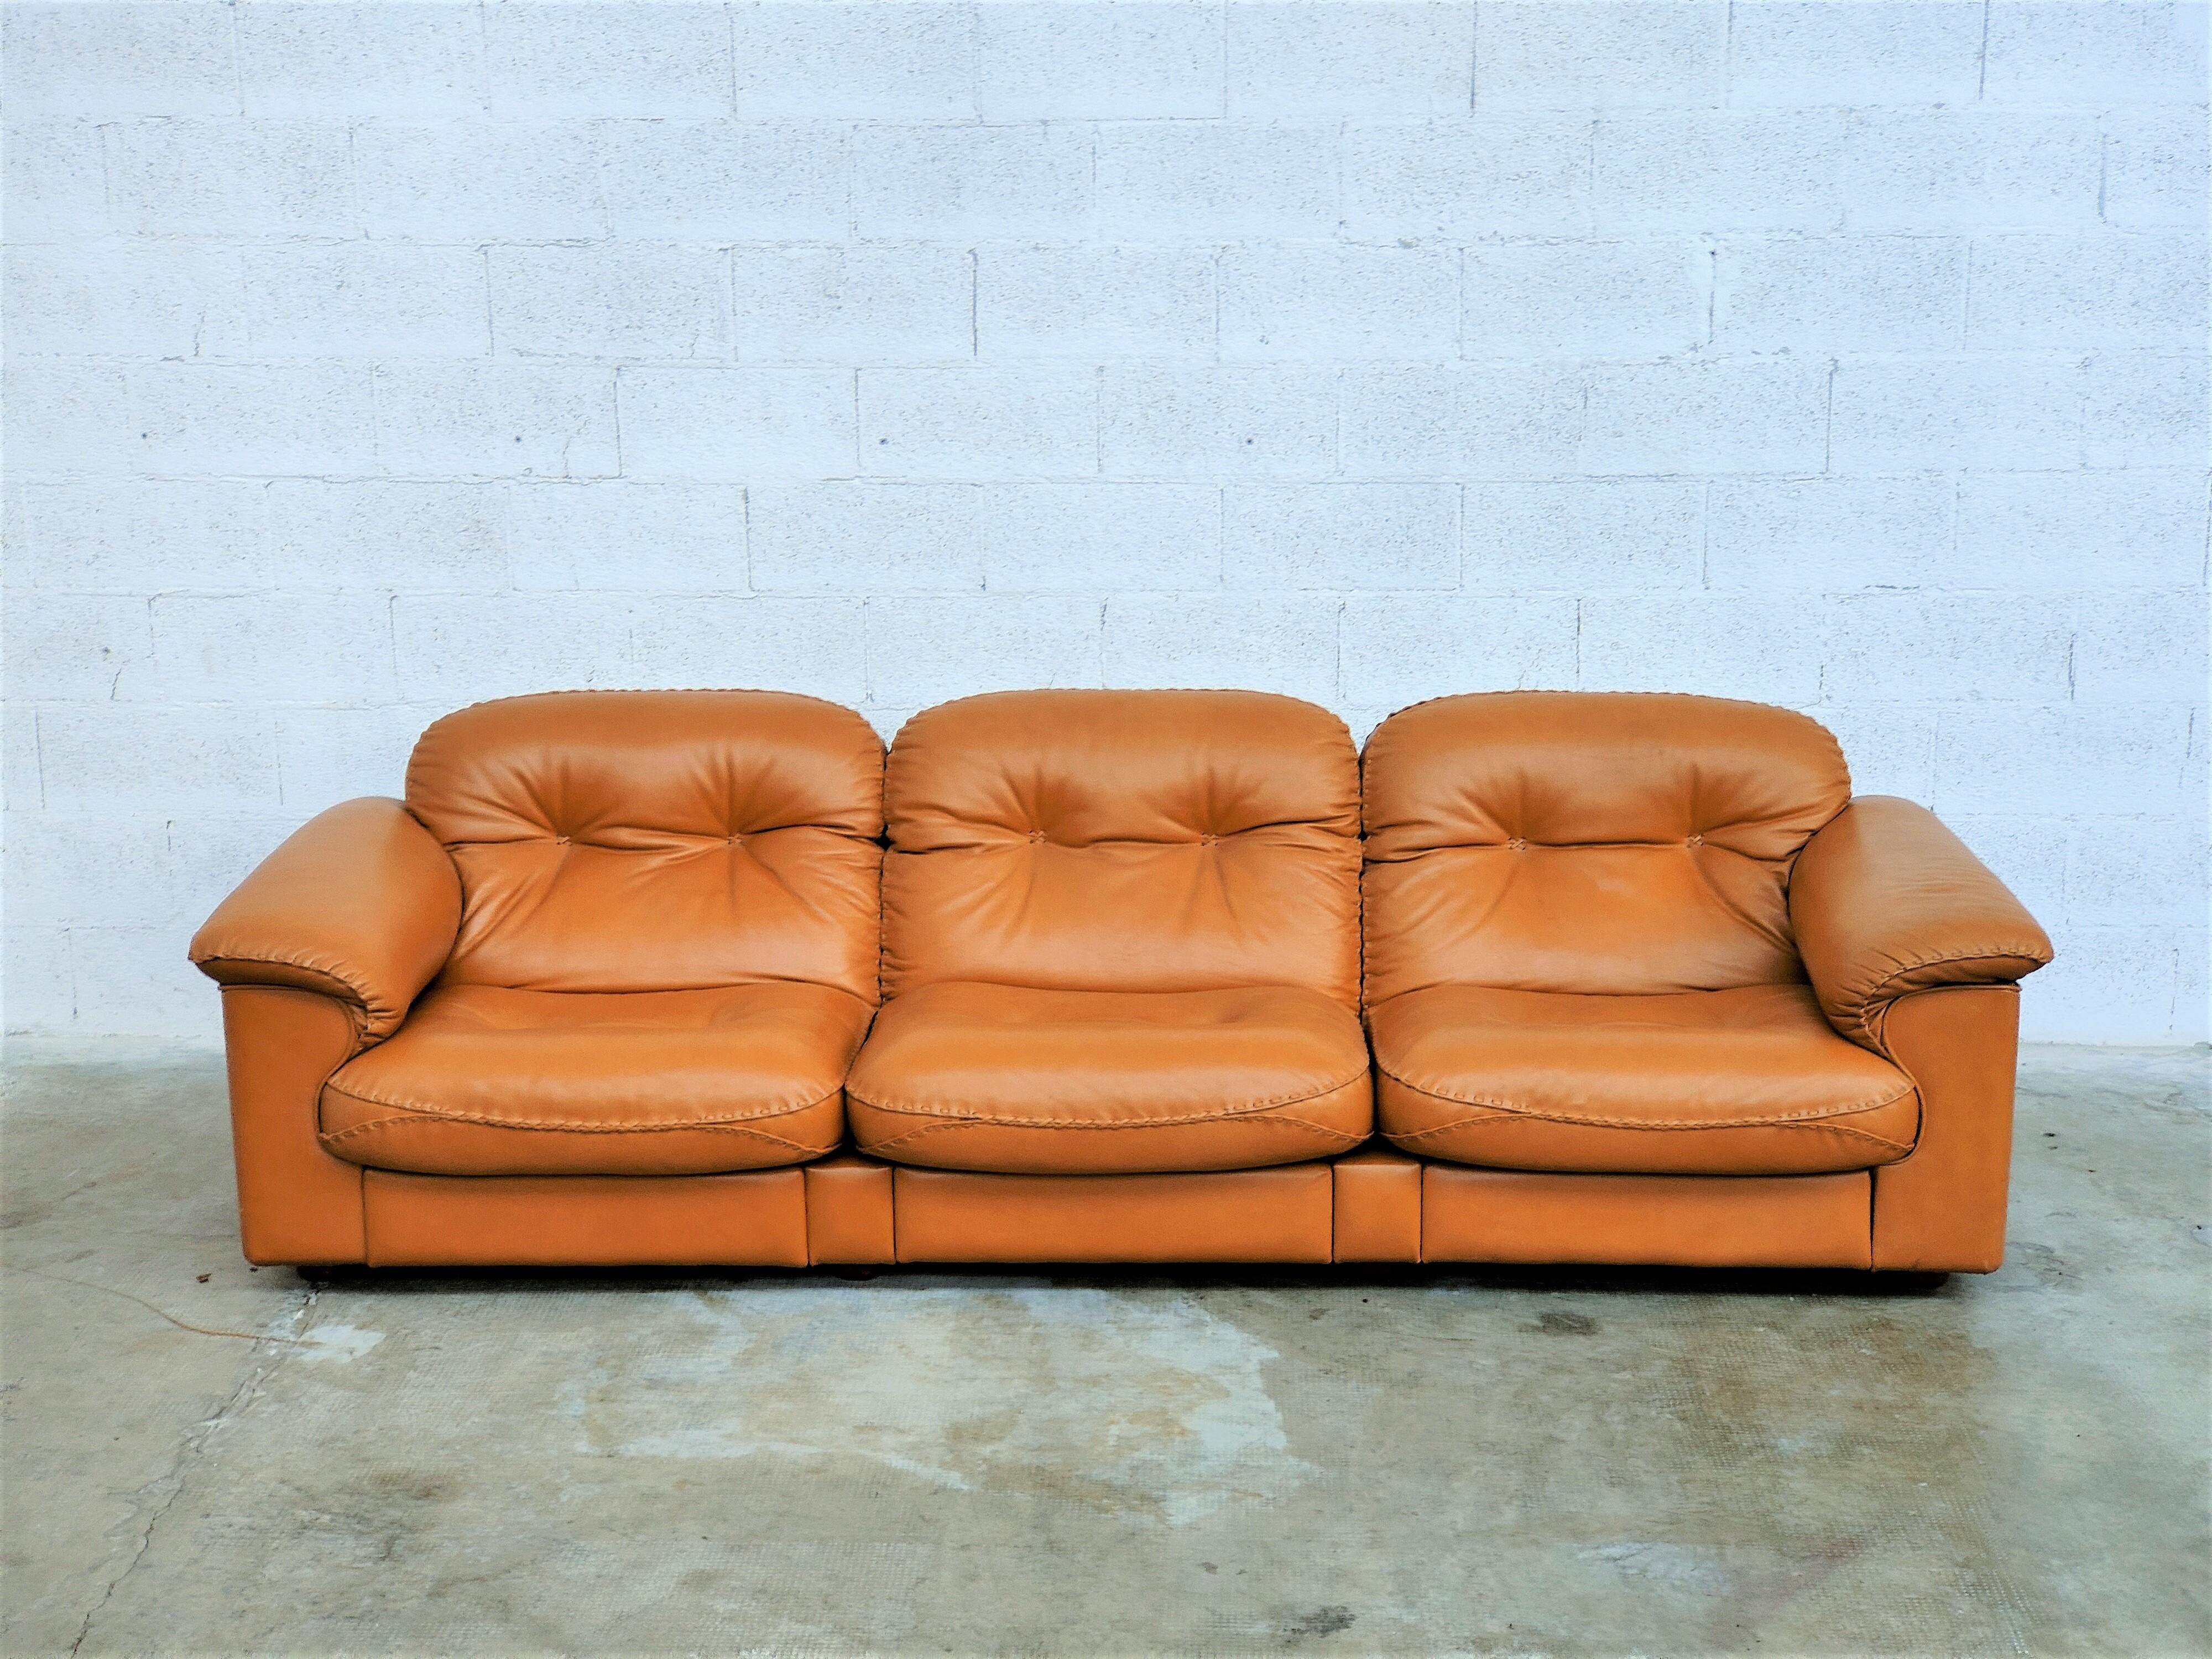 De Sede leather lounge sofa upholstered in light brown leather, c.1970s. 
These Swiss made sofa feature a reclining mechanism that allows the seats to extend forward while the back rests recline for maximum comfort.
 The hand stitched seams add a